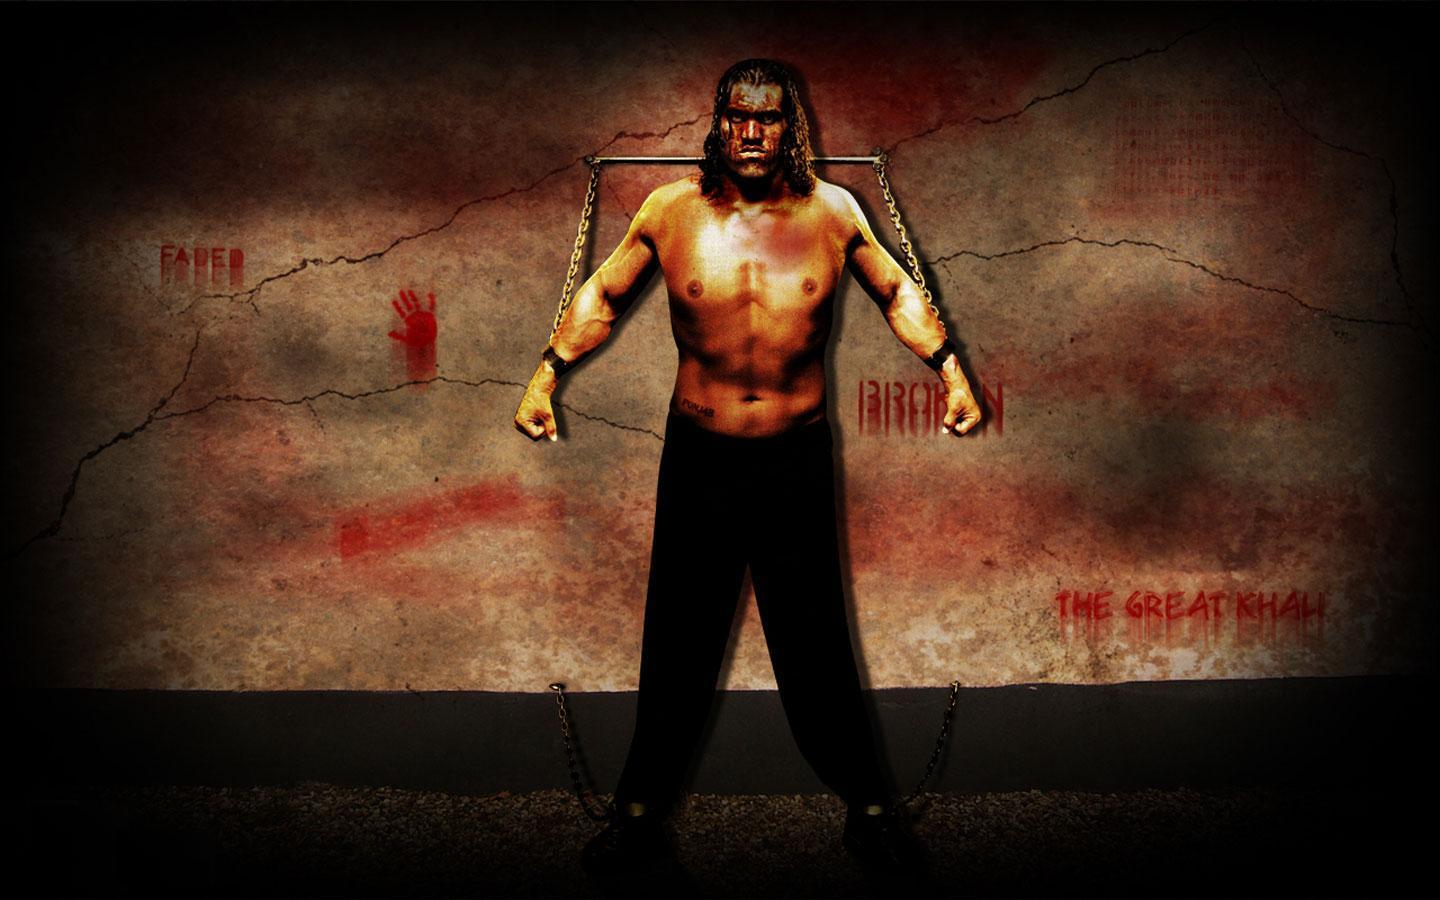 The great khali wallpapers